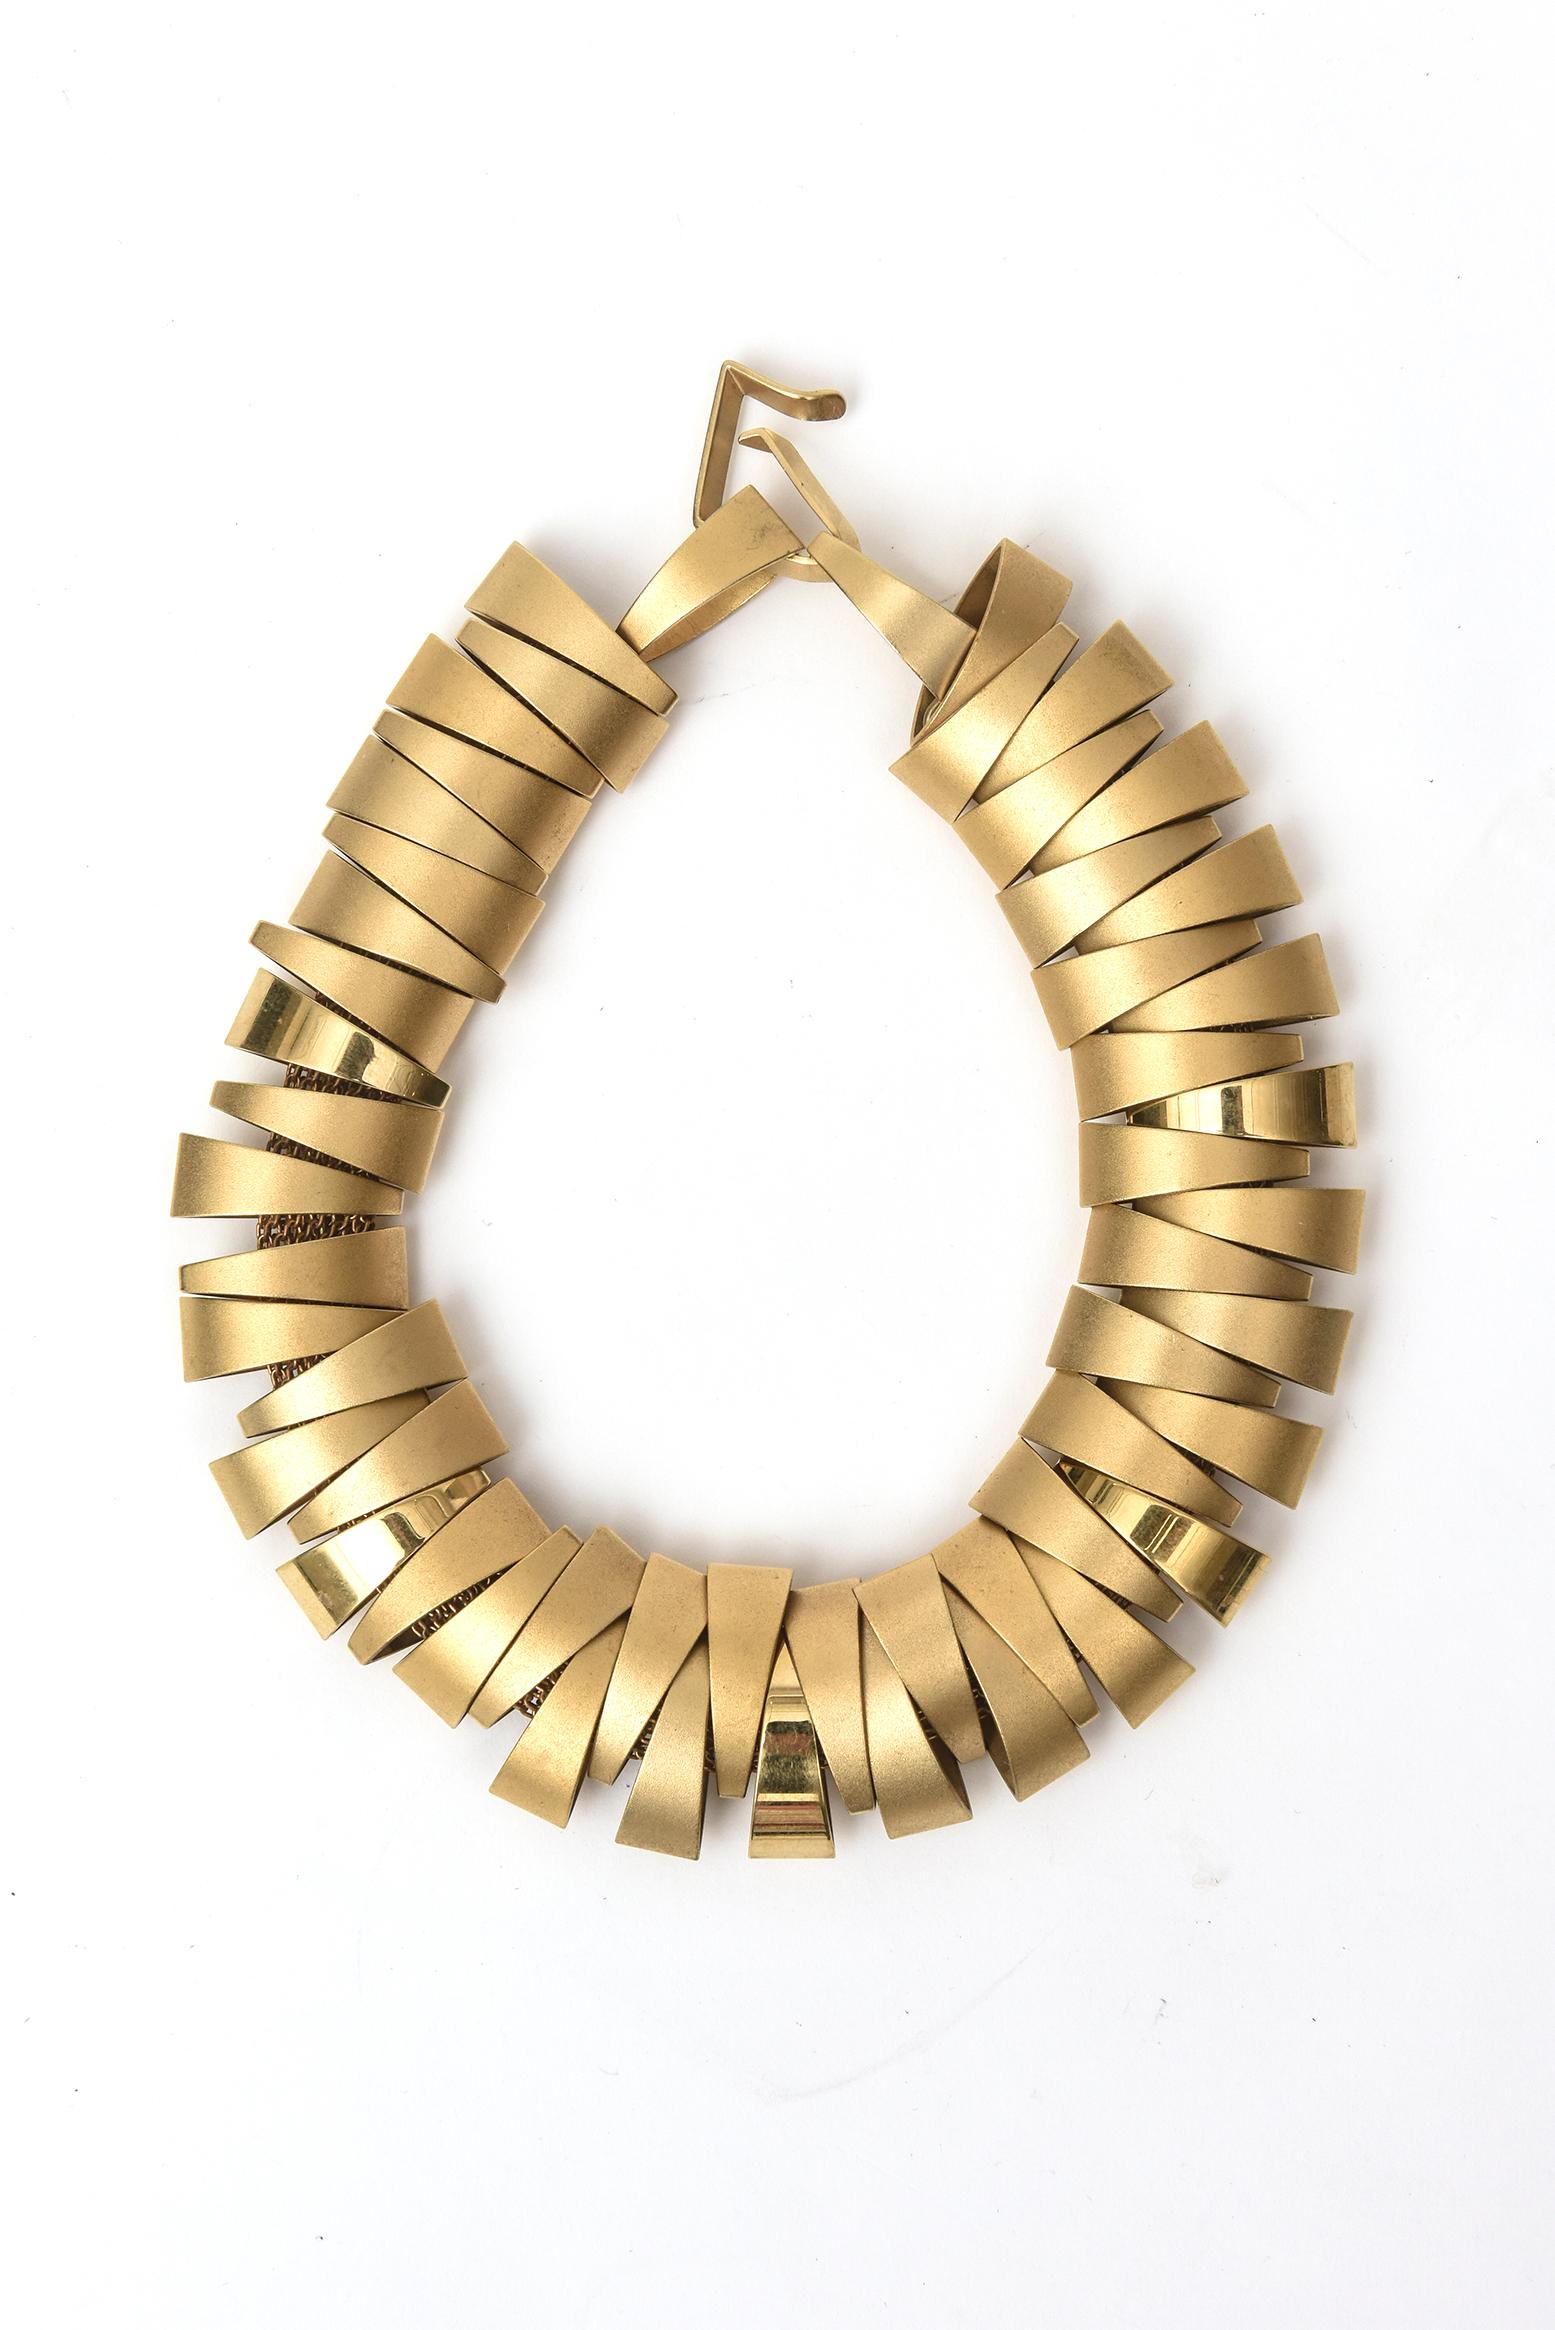 This amazing and stunning sculptural gold plated collar necklace belonged to an important collector. It is not signed. We do not know who designed the piece but it is fabulous. This needs a very small long neck and is a conversation piece of